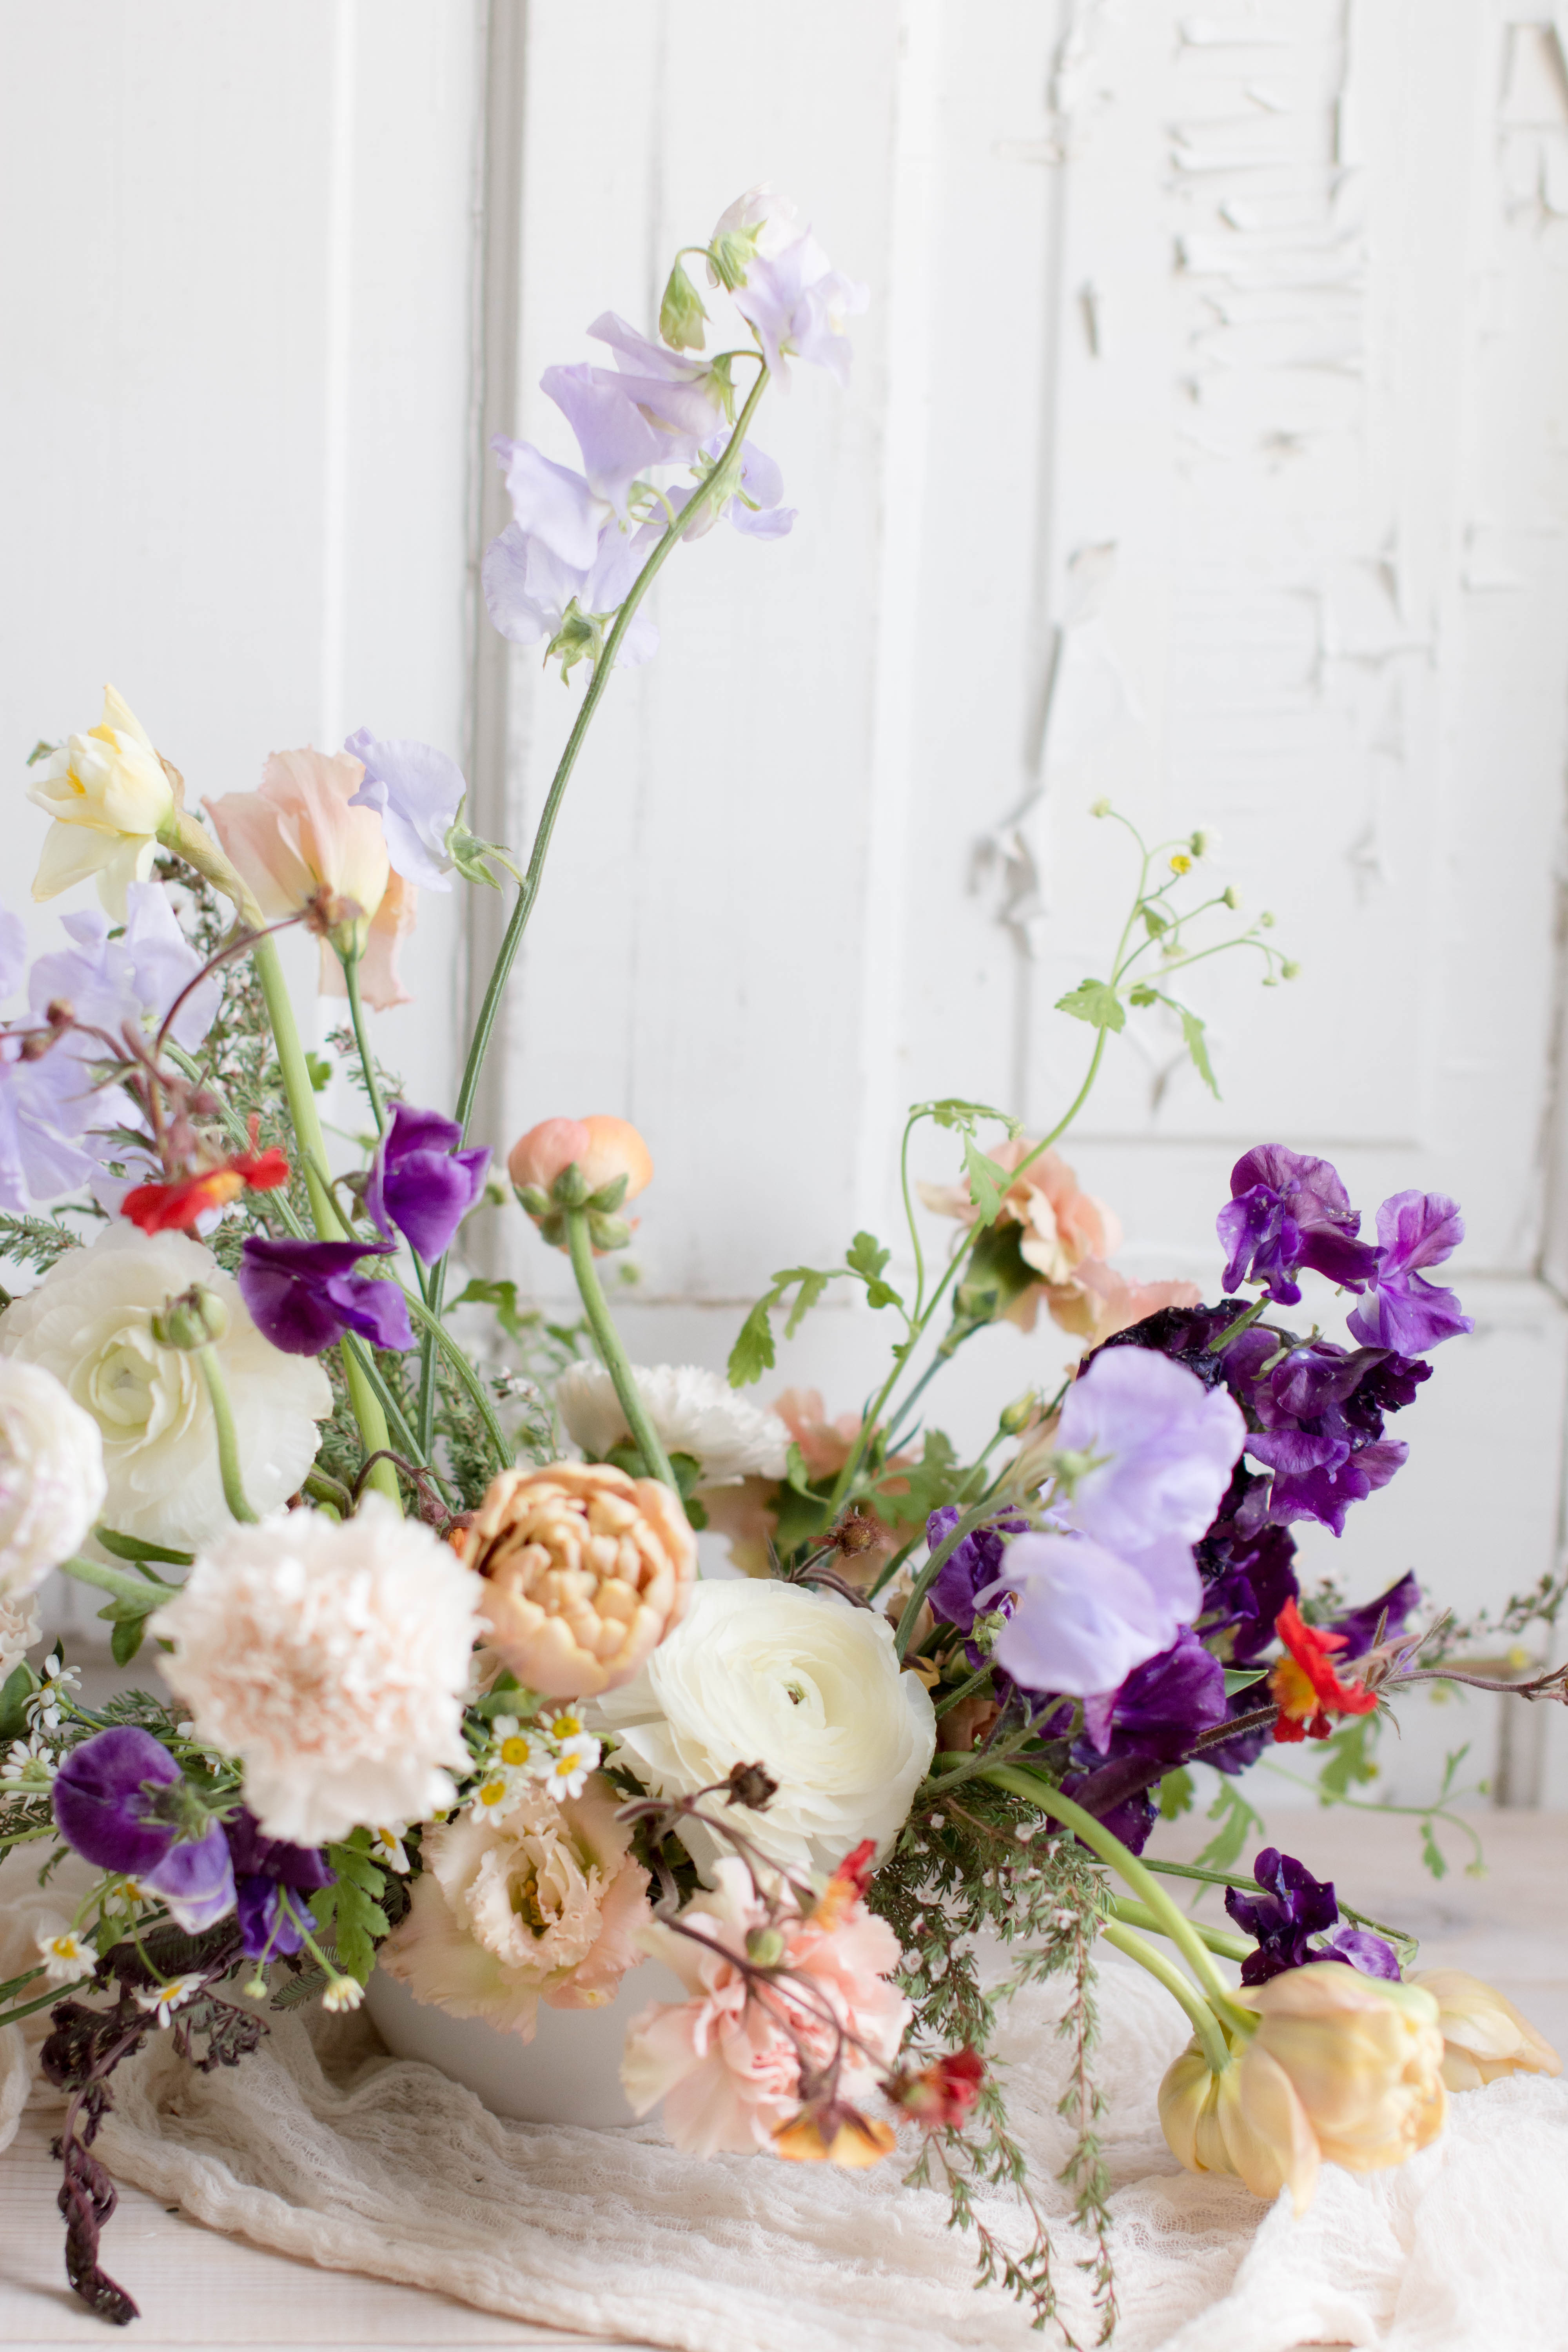 The Best Wedding FLowers for April